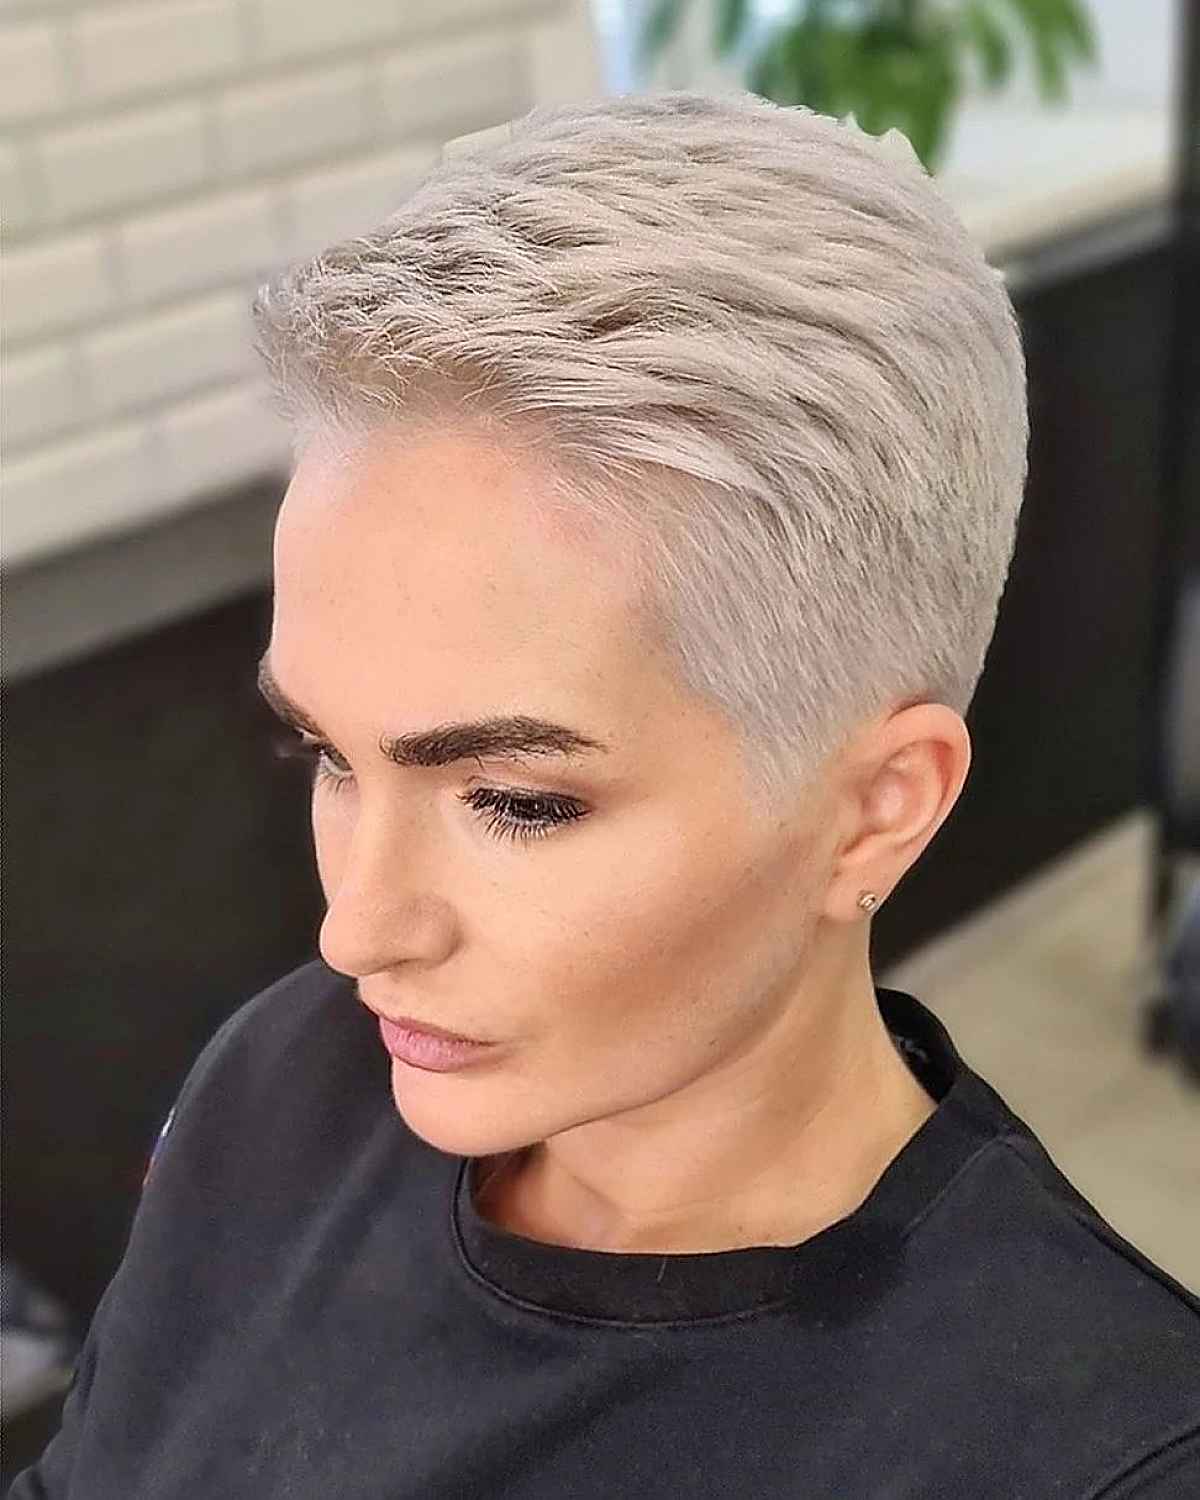 40 Very Short Haircuts And Hairstyles To Try In 2023 | Hair.com By L'Oréal